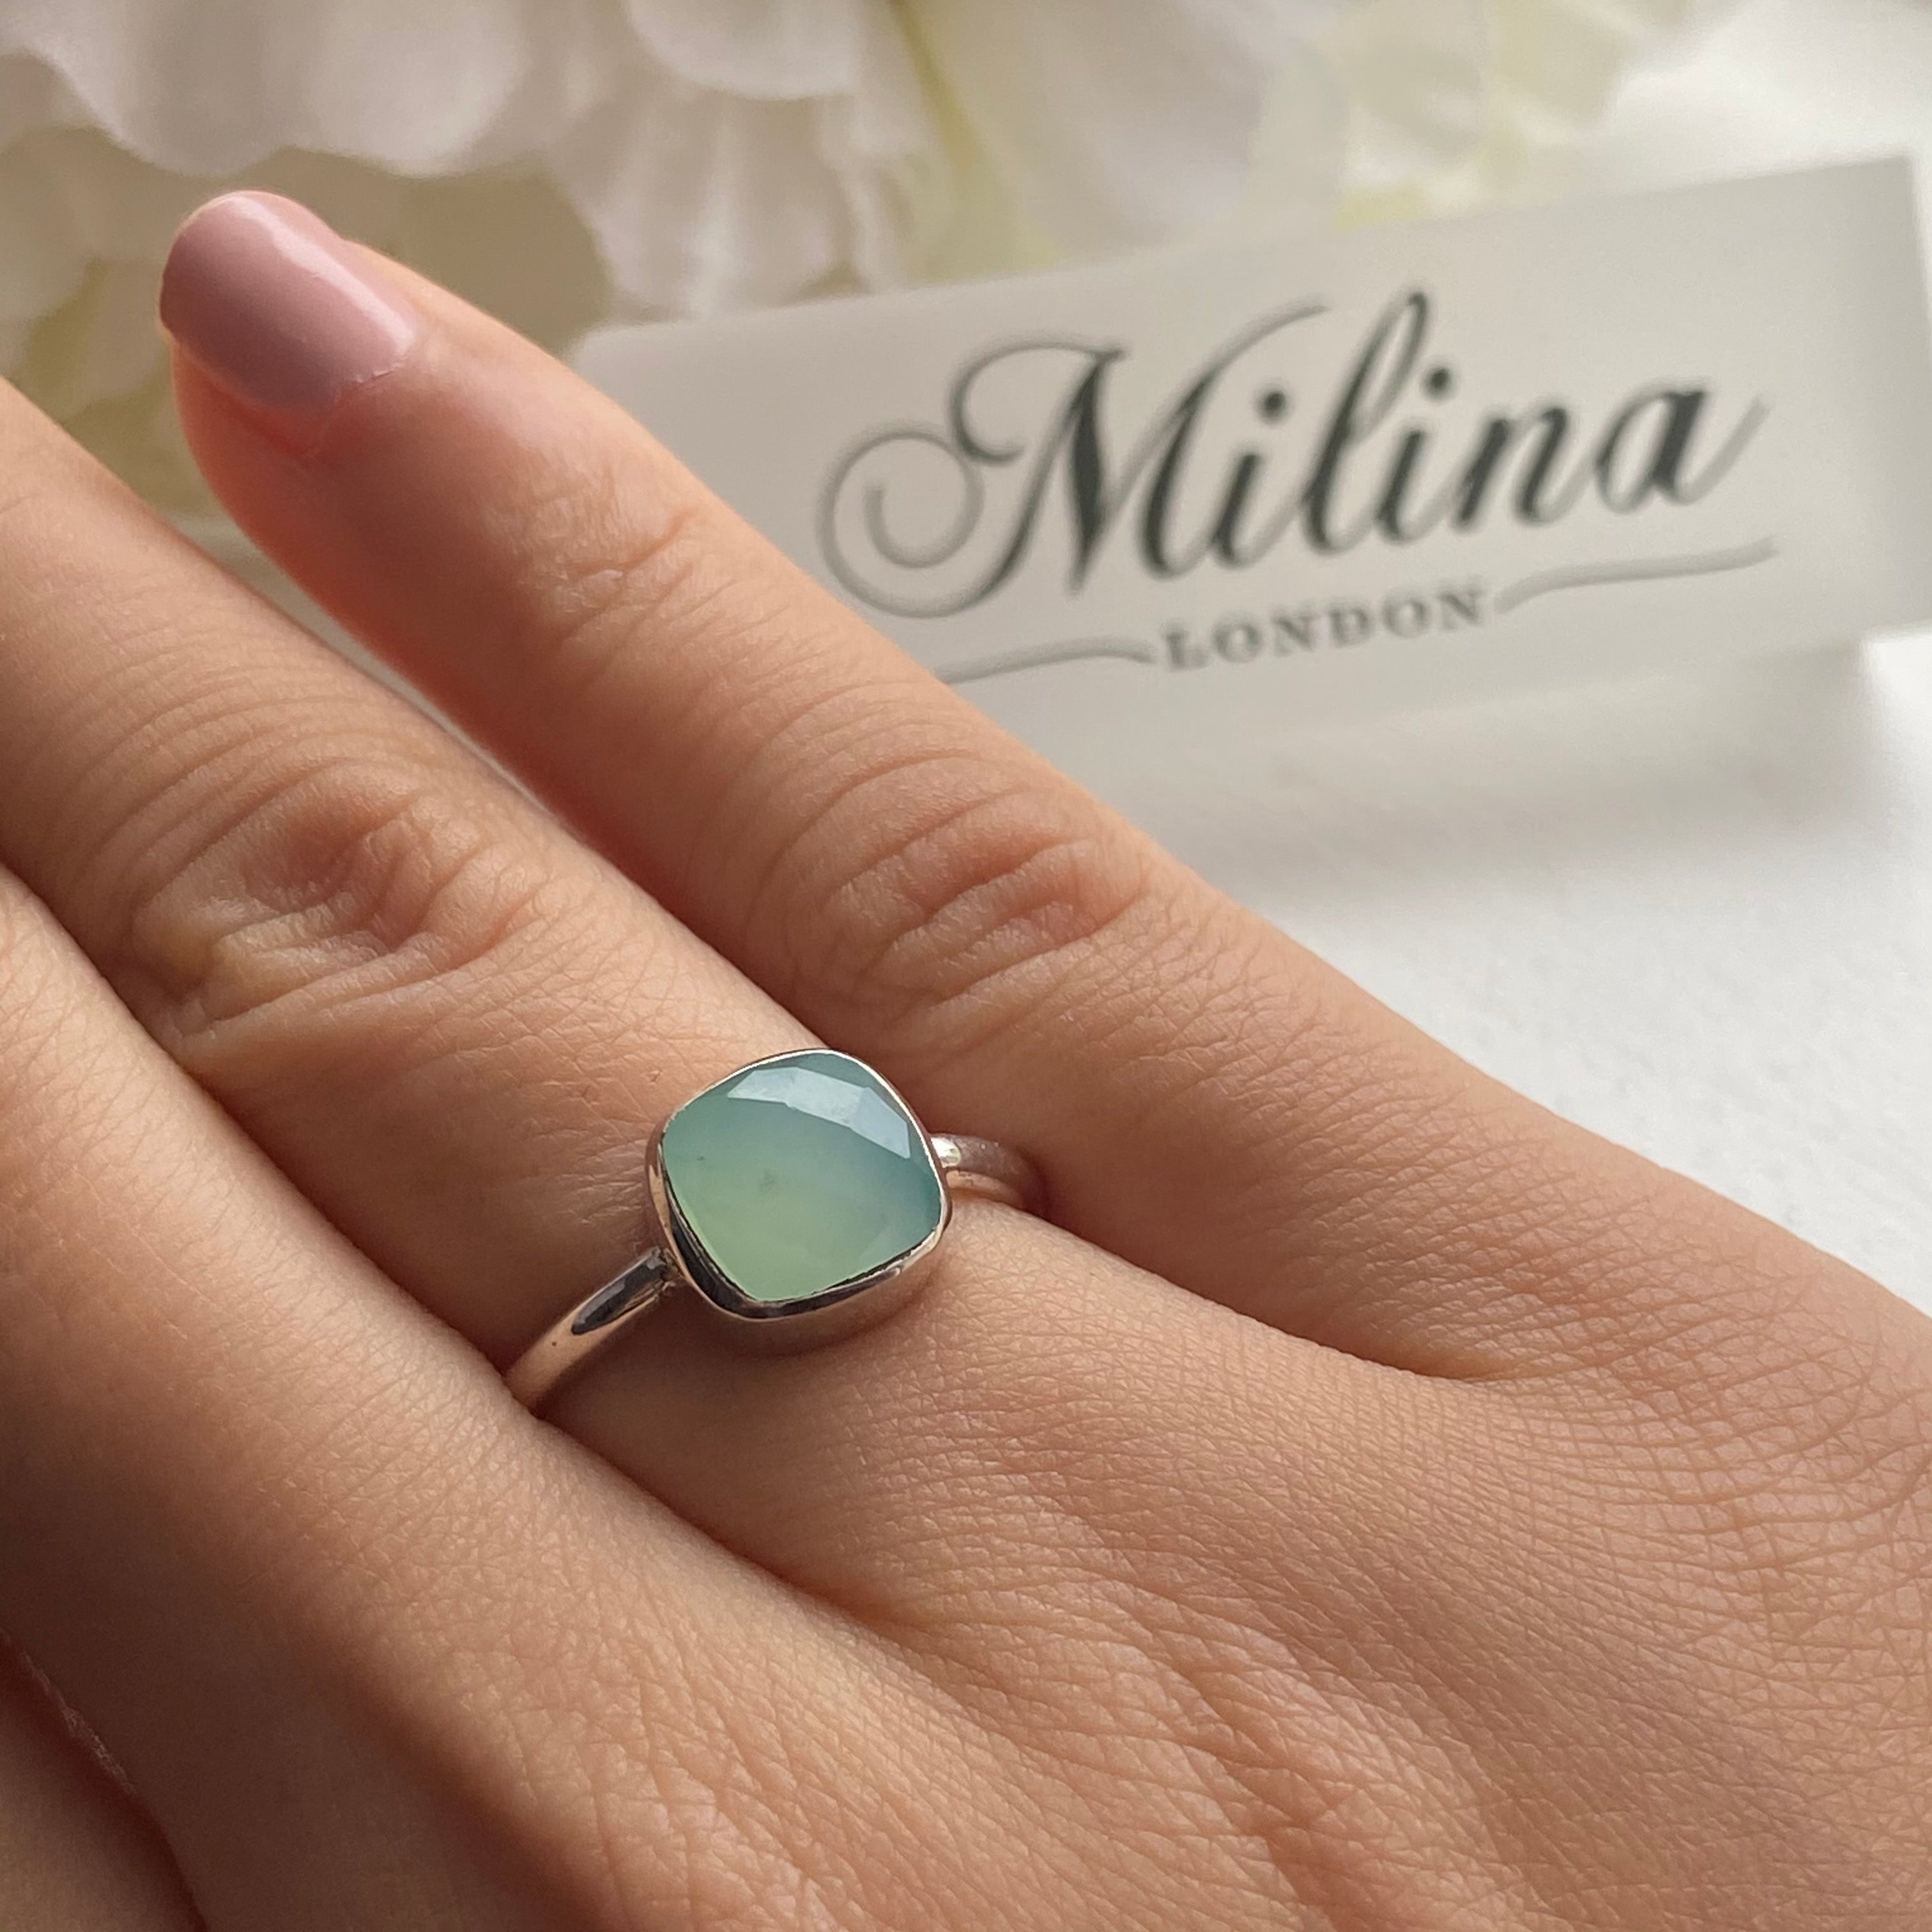 Faceted Square Cut Natural Gemstone Sterling Silver Solitaire Ring - Aqua Chalcedony